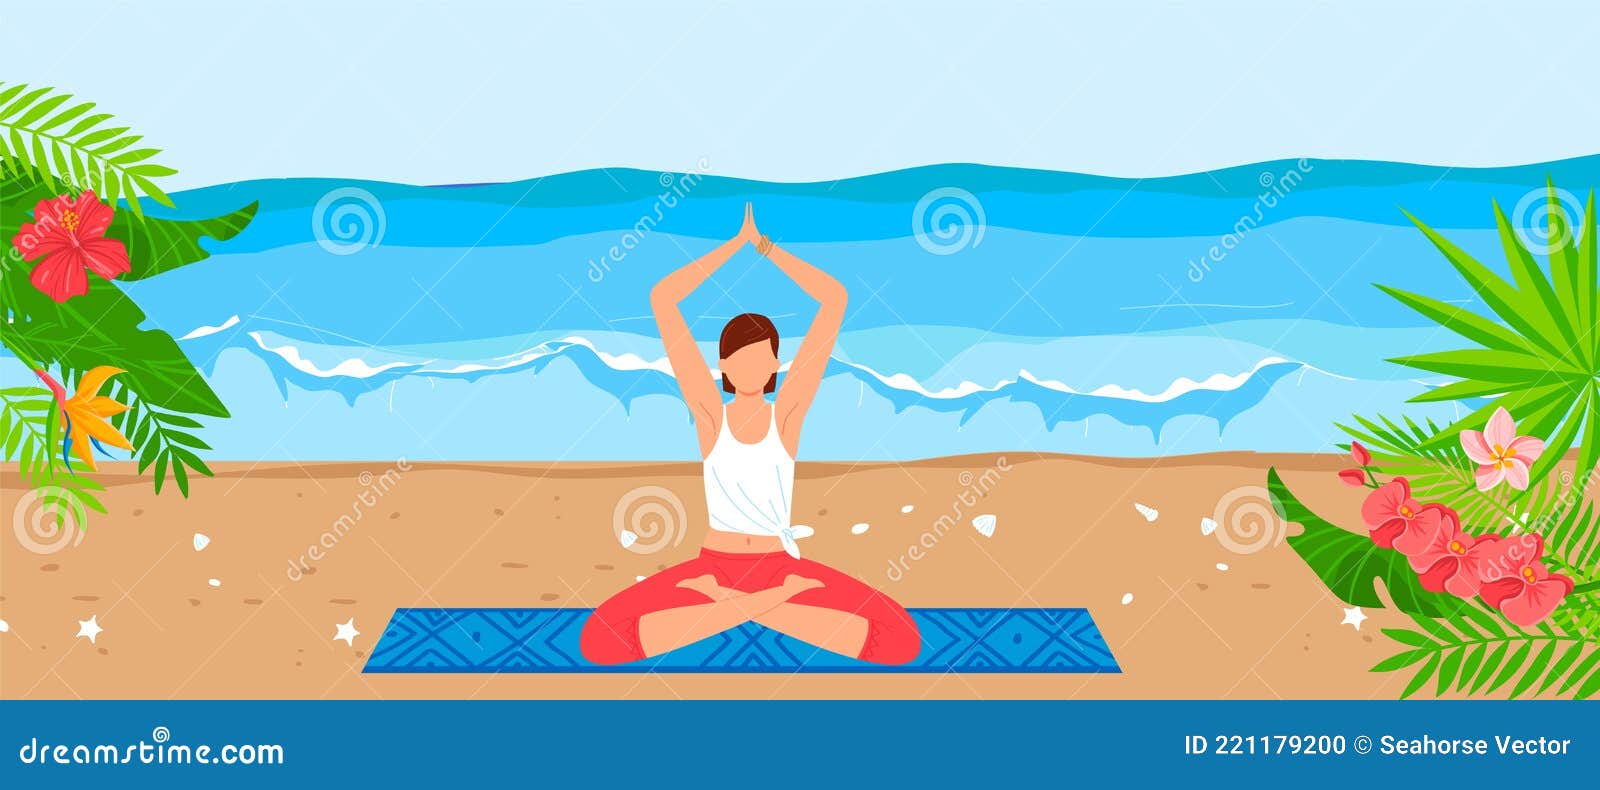 Two Women Practicing Yoga, One in Tree Pose, Wear Colorful Clothing,  Happiness, Fitness. Yoga Class with Dynamic Poses Stock Vector -  Illustration of women, harmony: 304928385